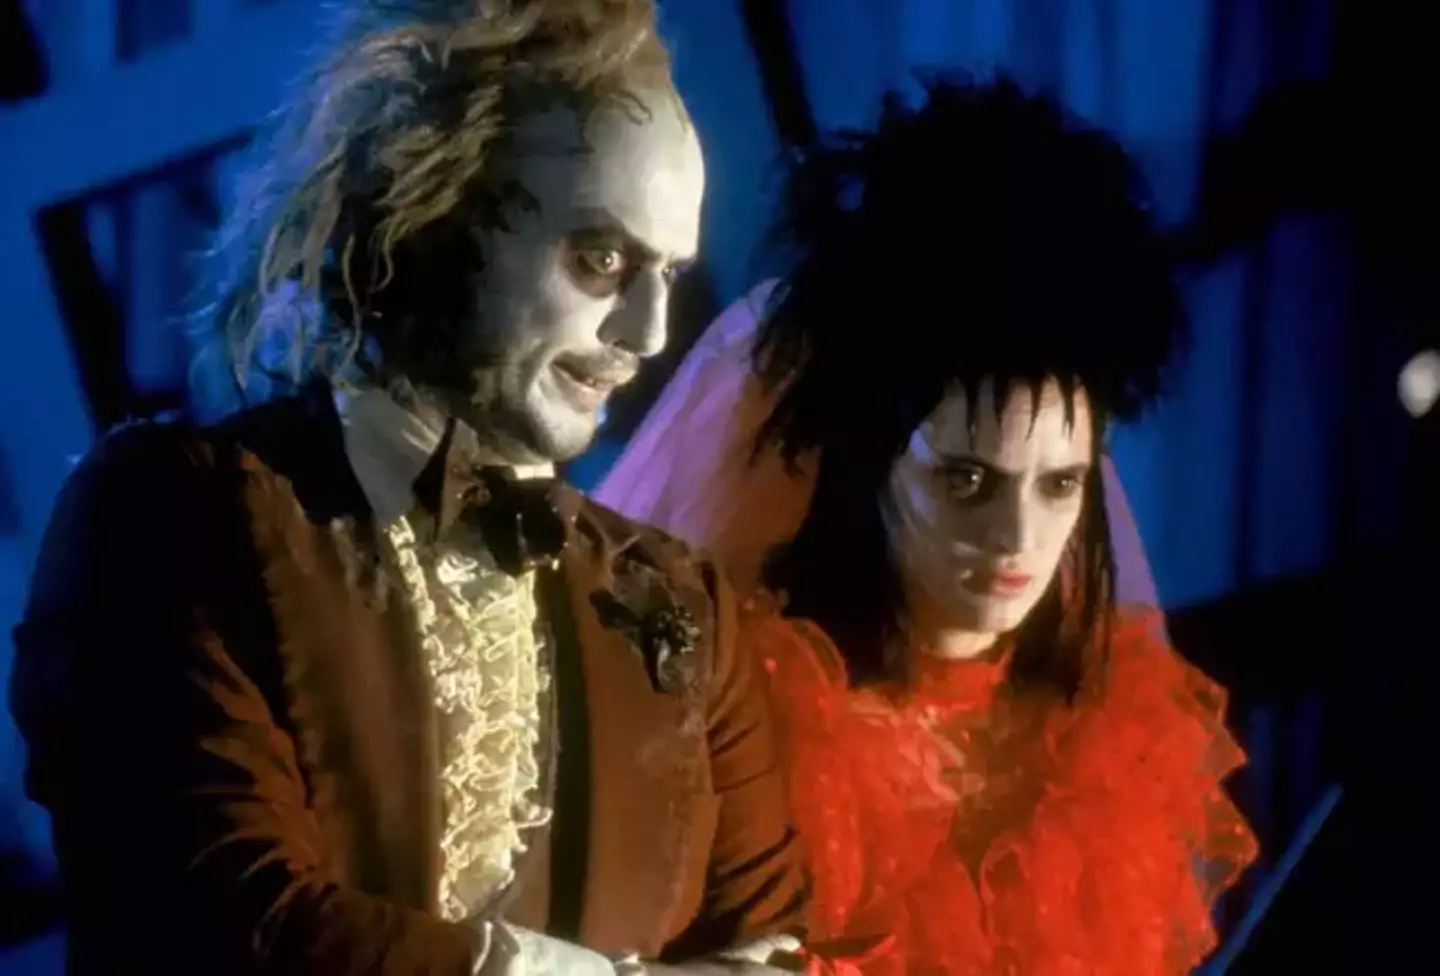 Michael Keaton and Winona Ryder in the 1988 Beetlejuice.